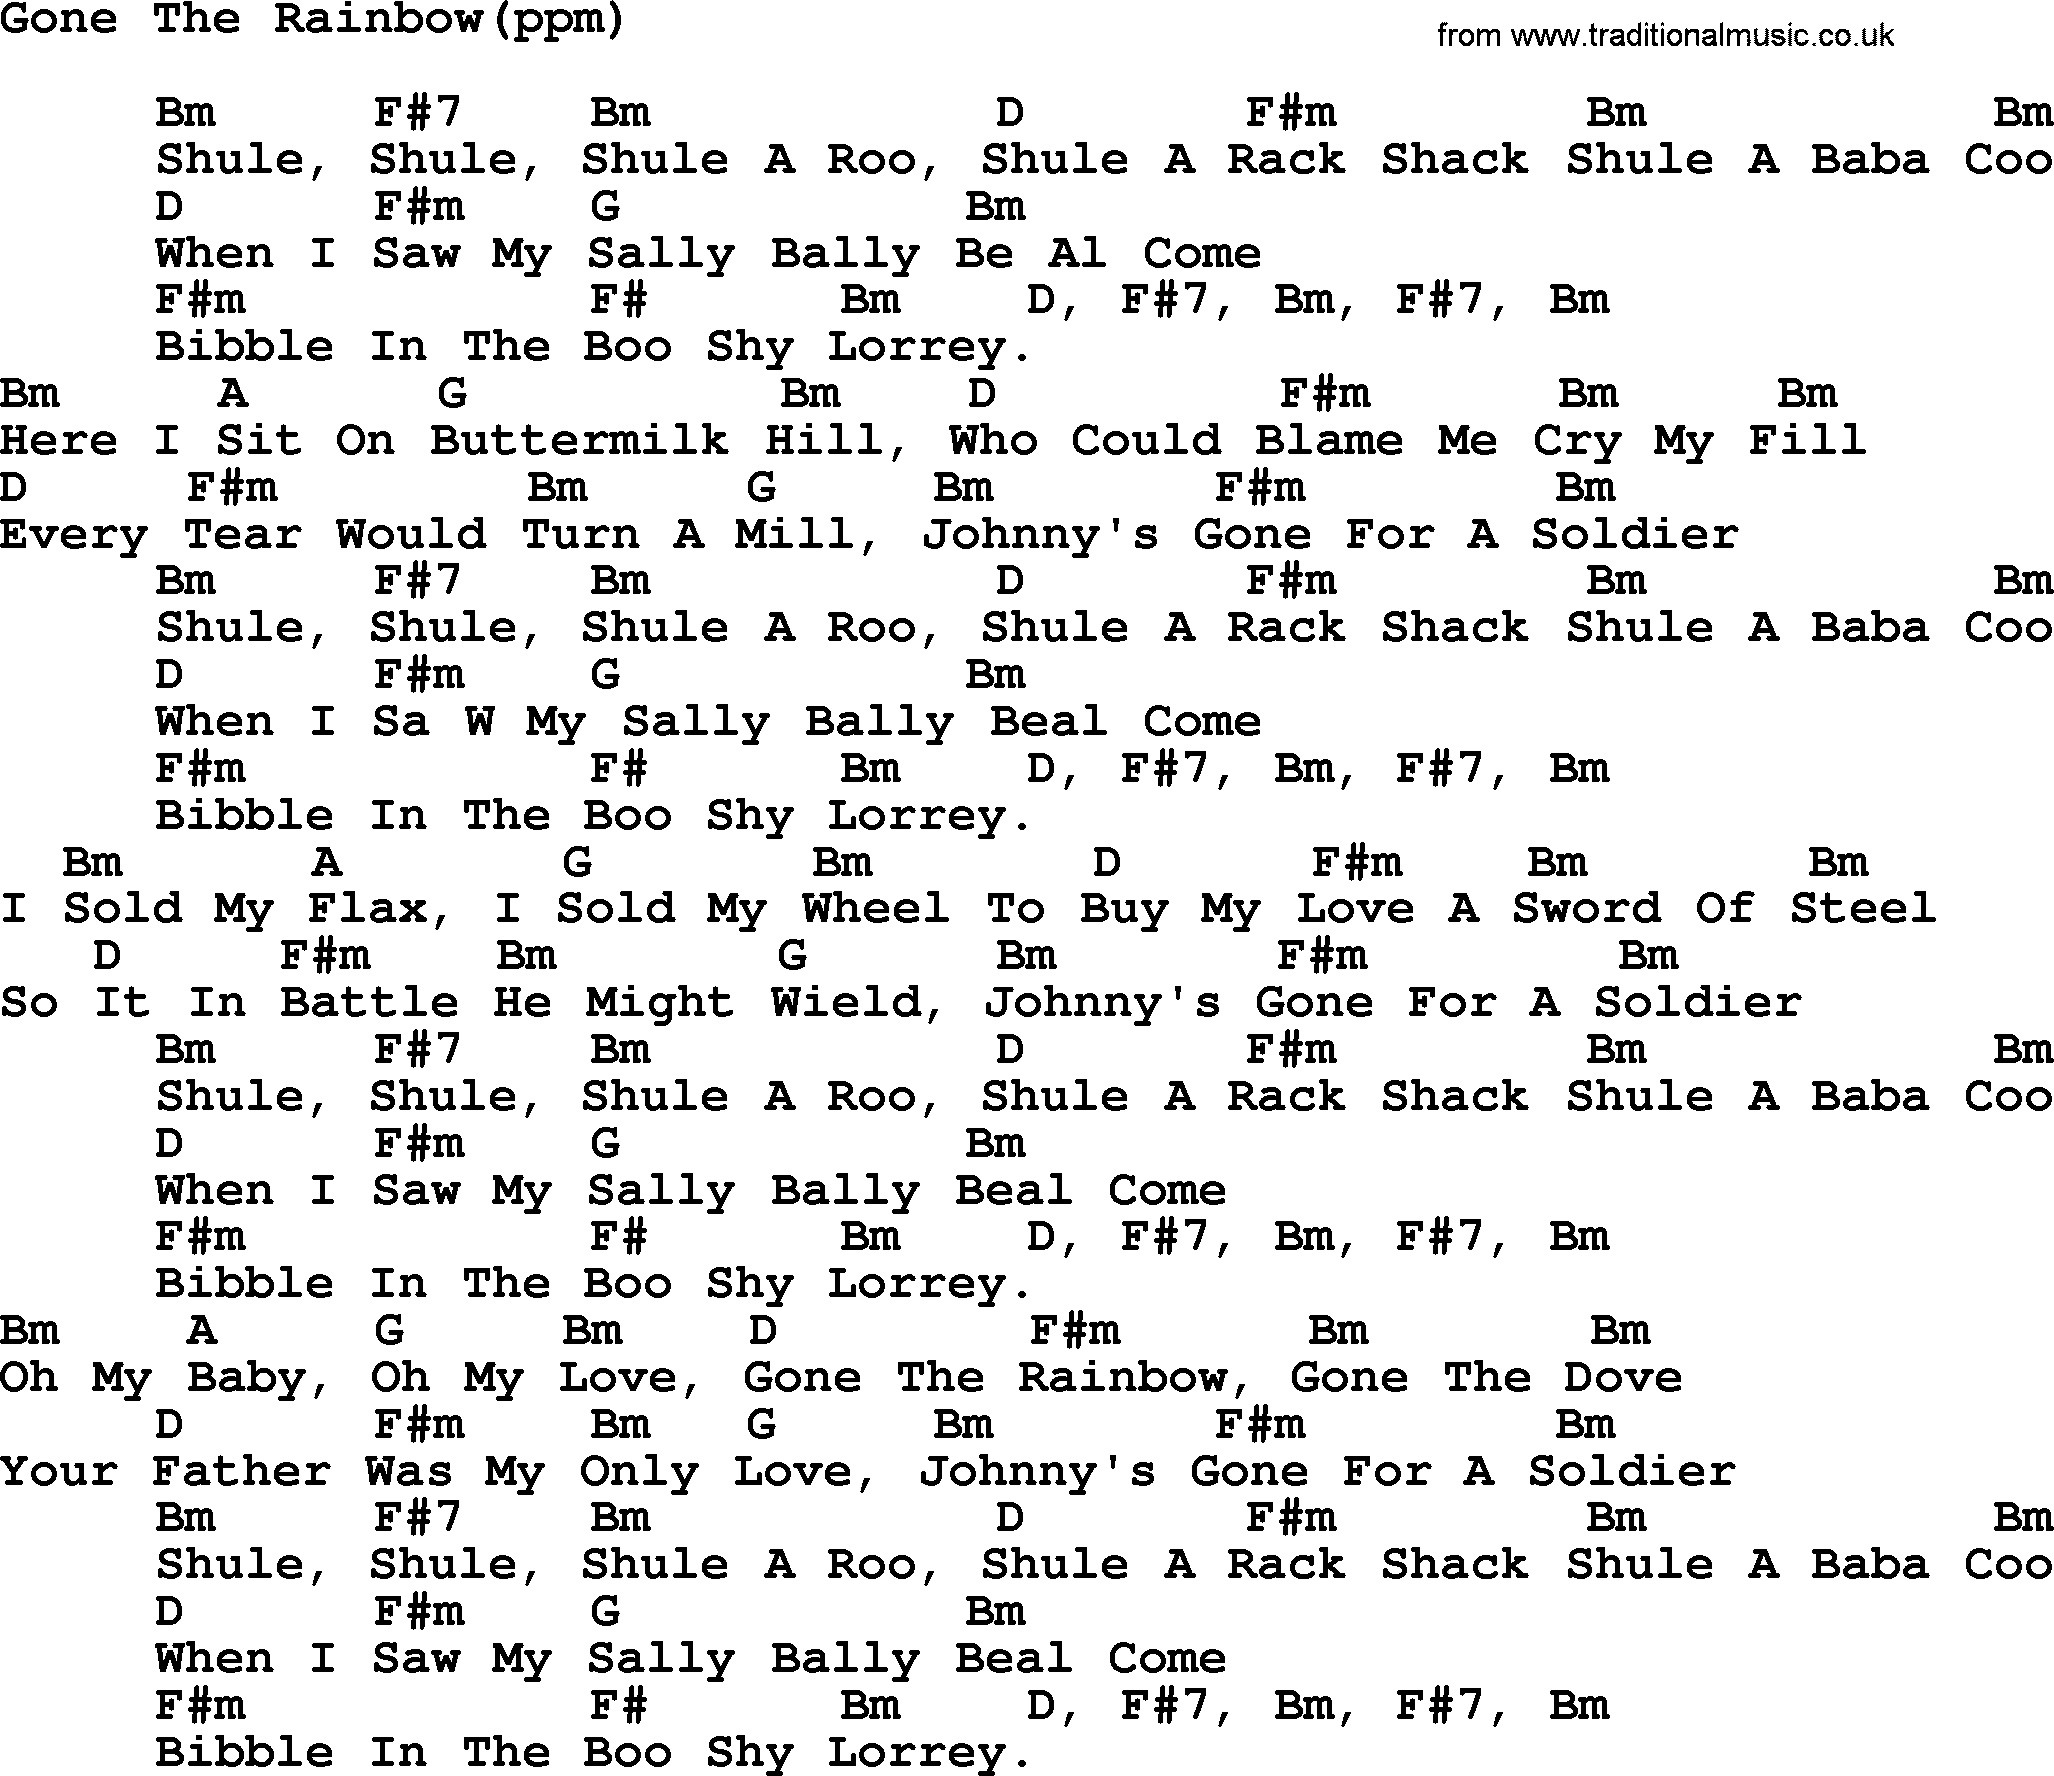 Peter, Paul and Mary song Gone The Rainbow, lyrics and chords